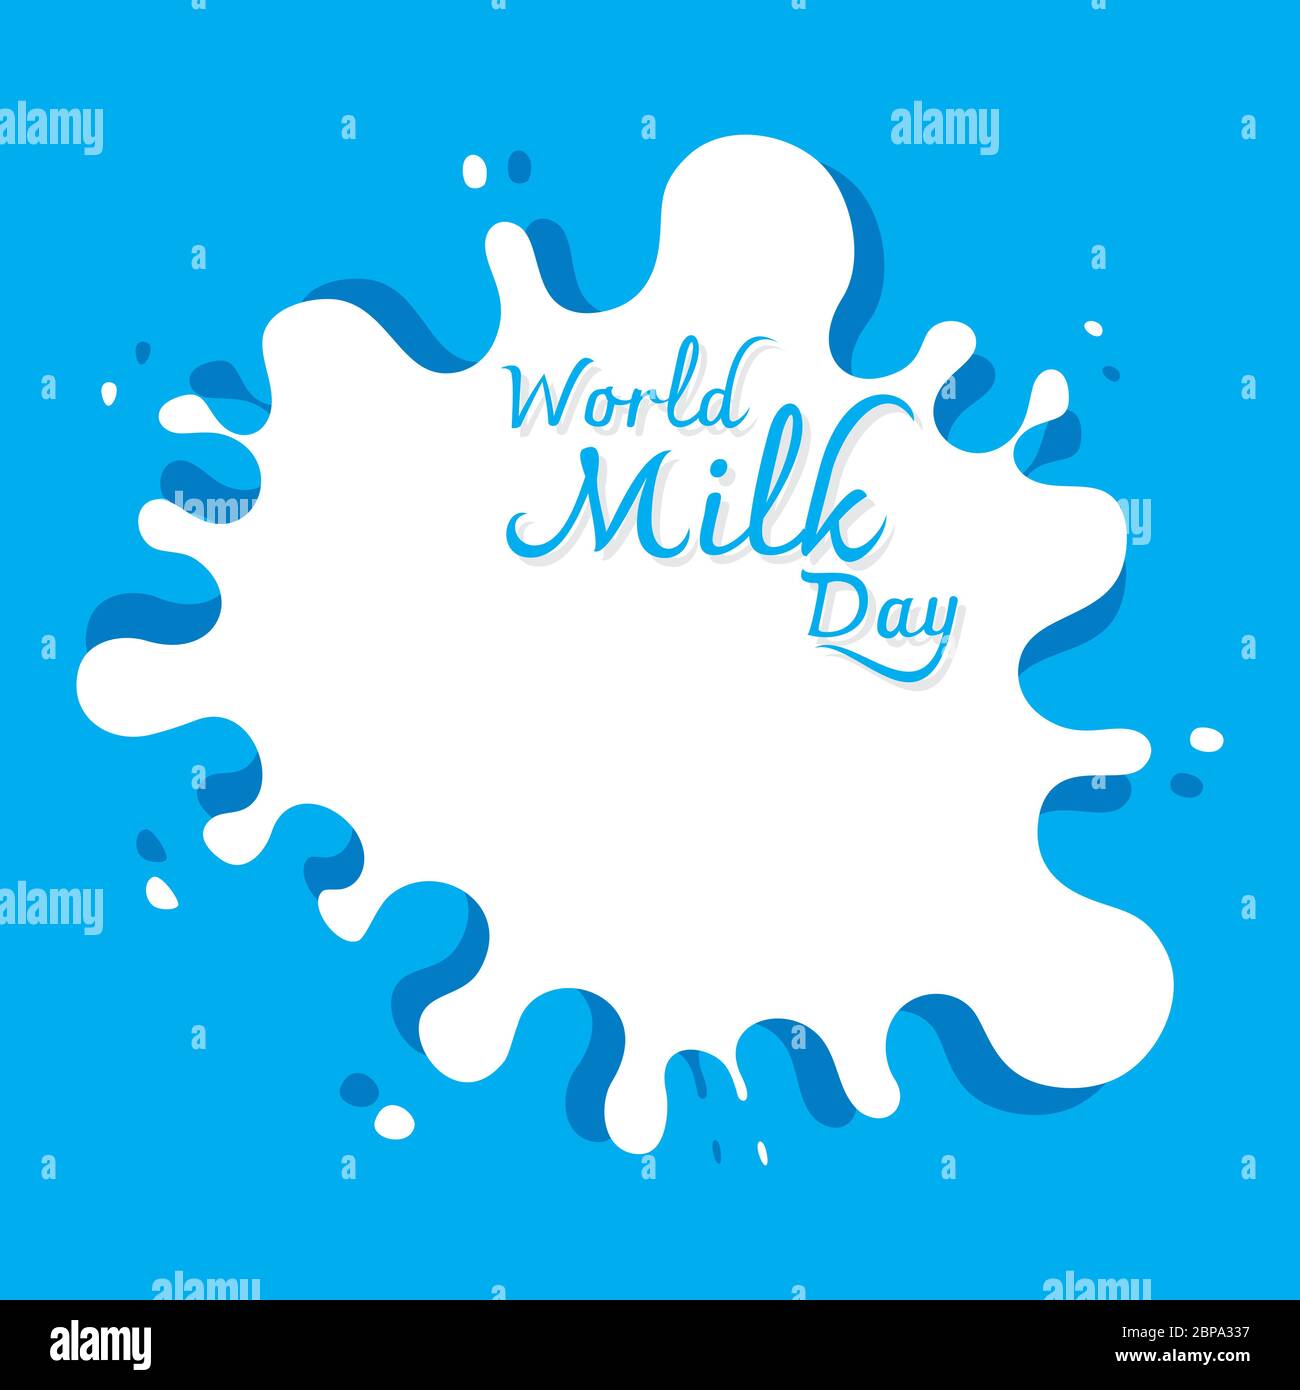 world milk day greeting or banner design. celebrate on 1 june every year Stock Vector